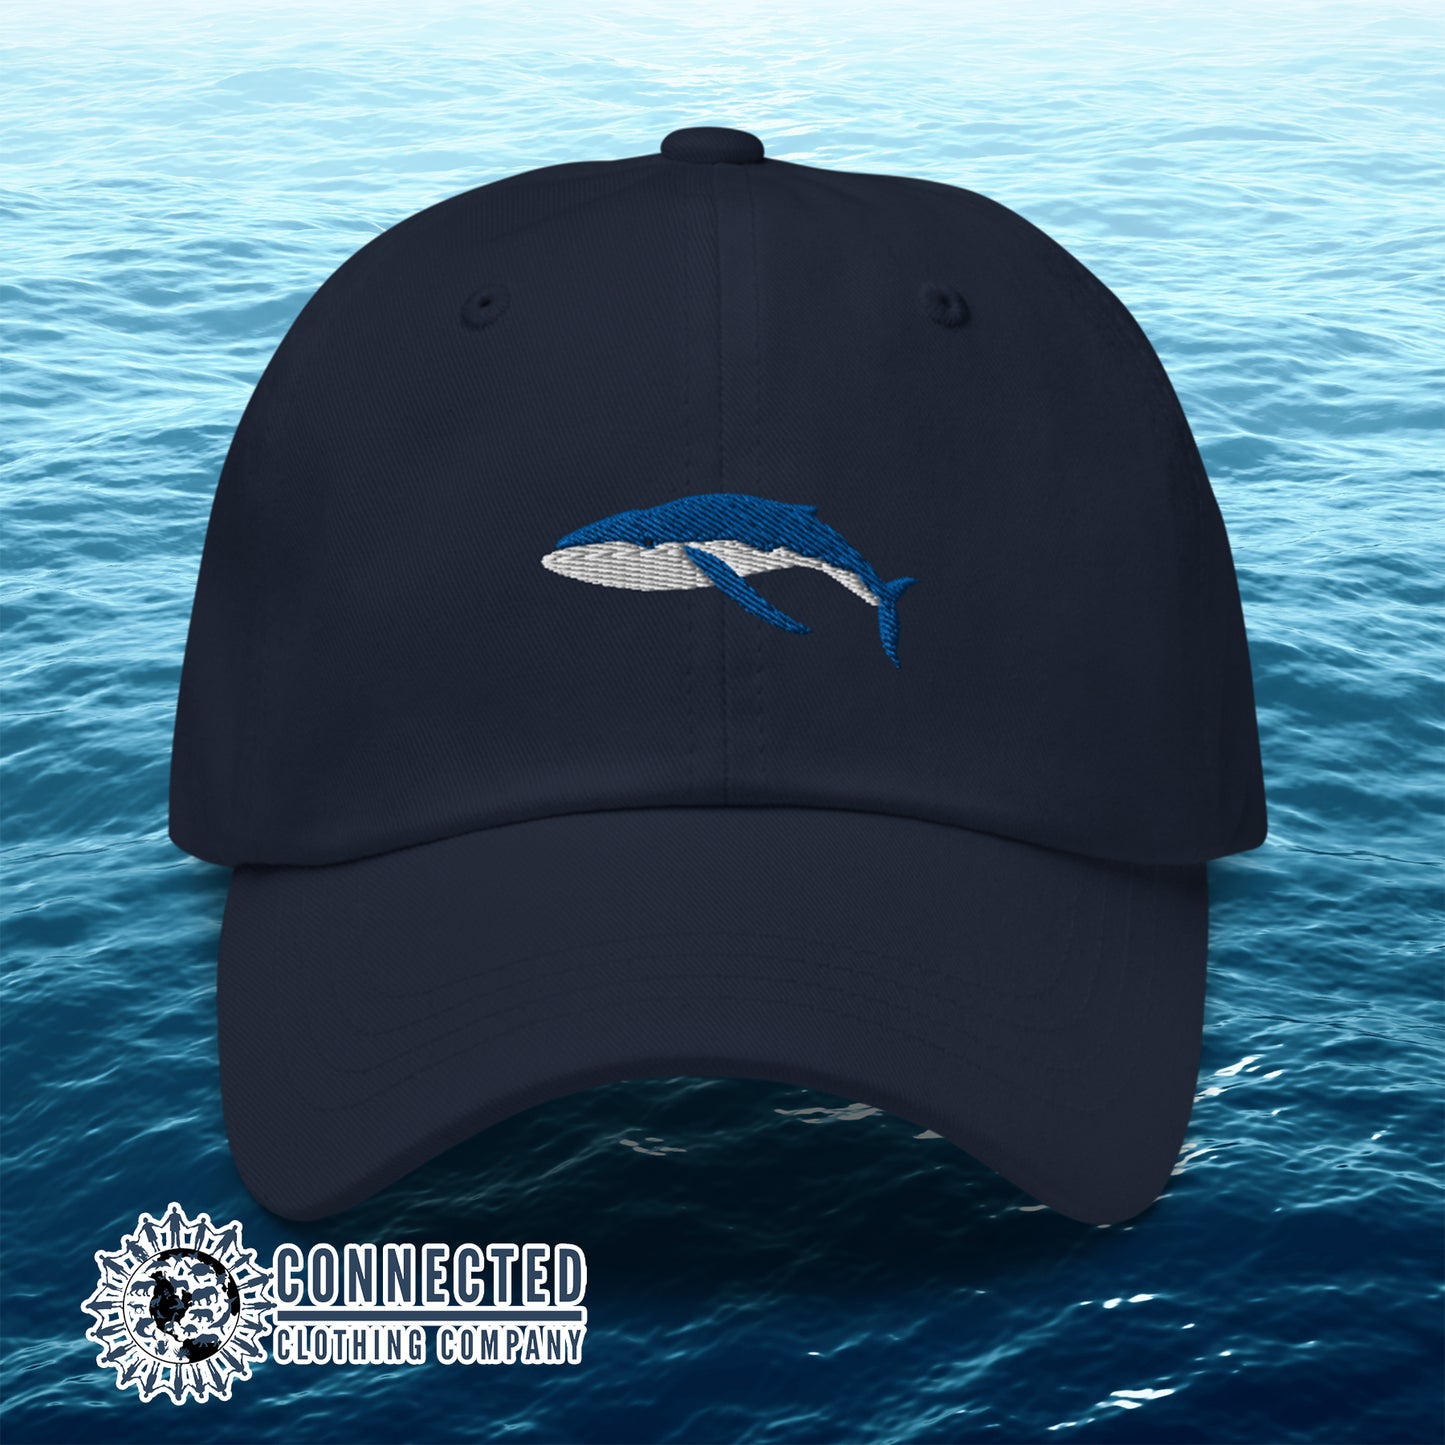 Navy Blue Humpback Whale Cotton Cap - sweetsherriloudesigns - 10% of profits donated to Mission Blue ocean conservation